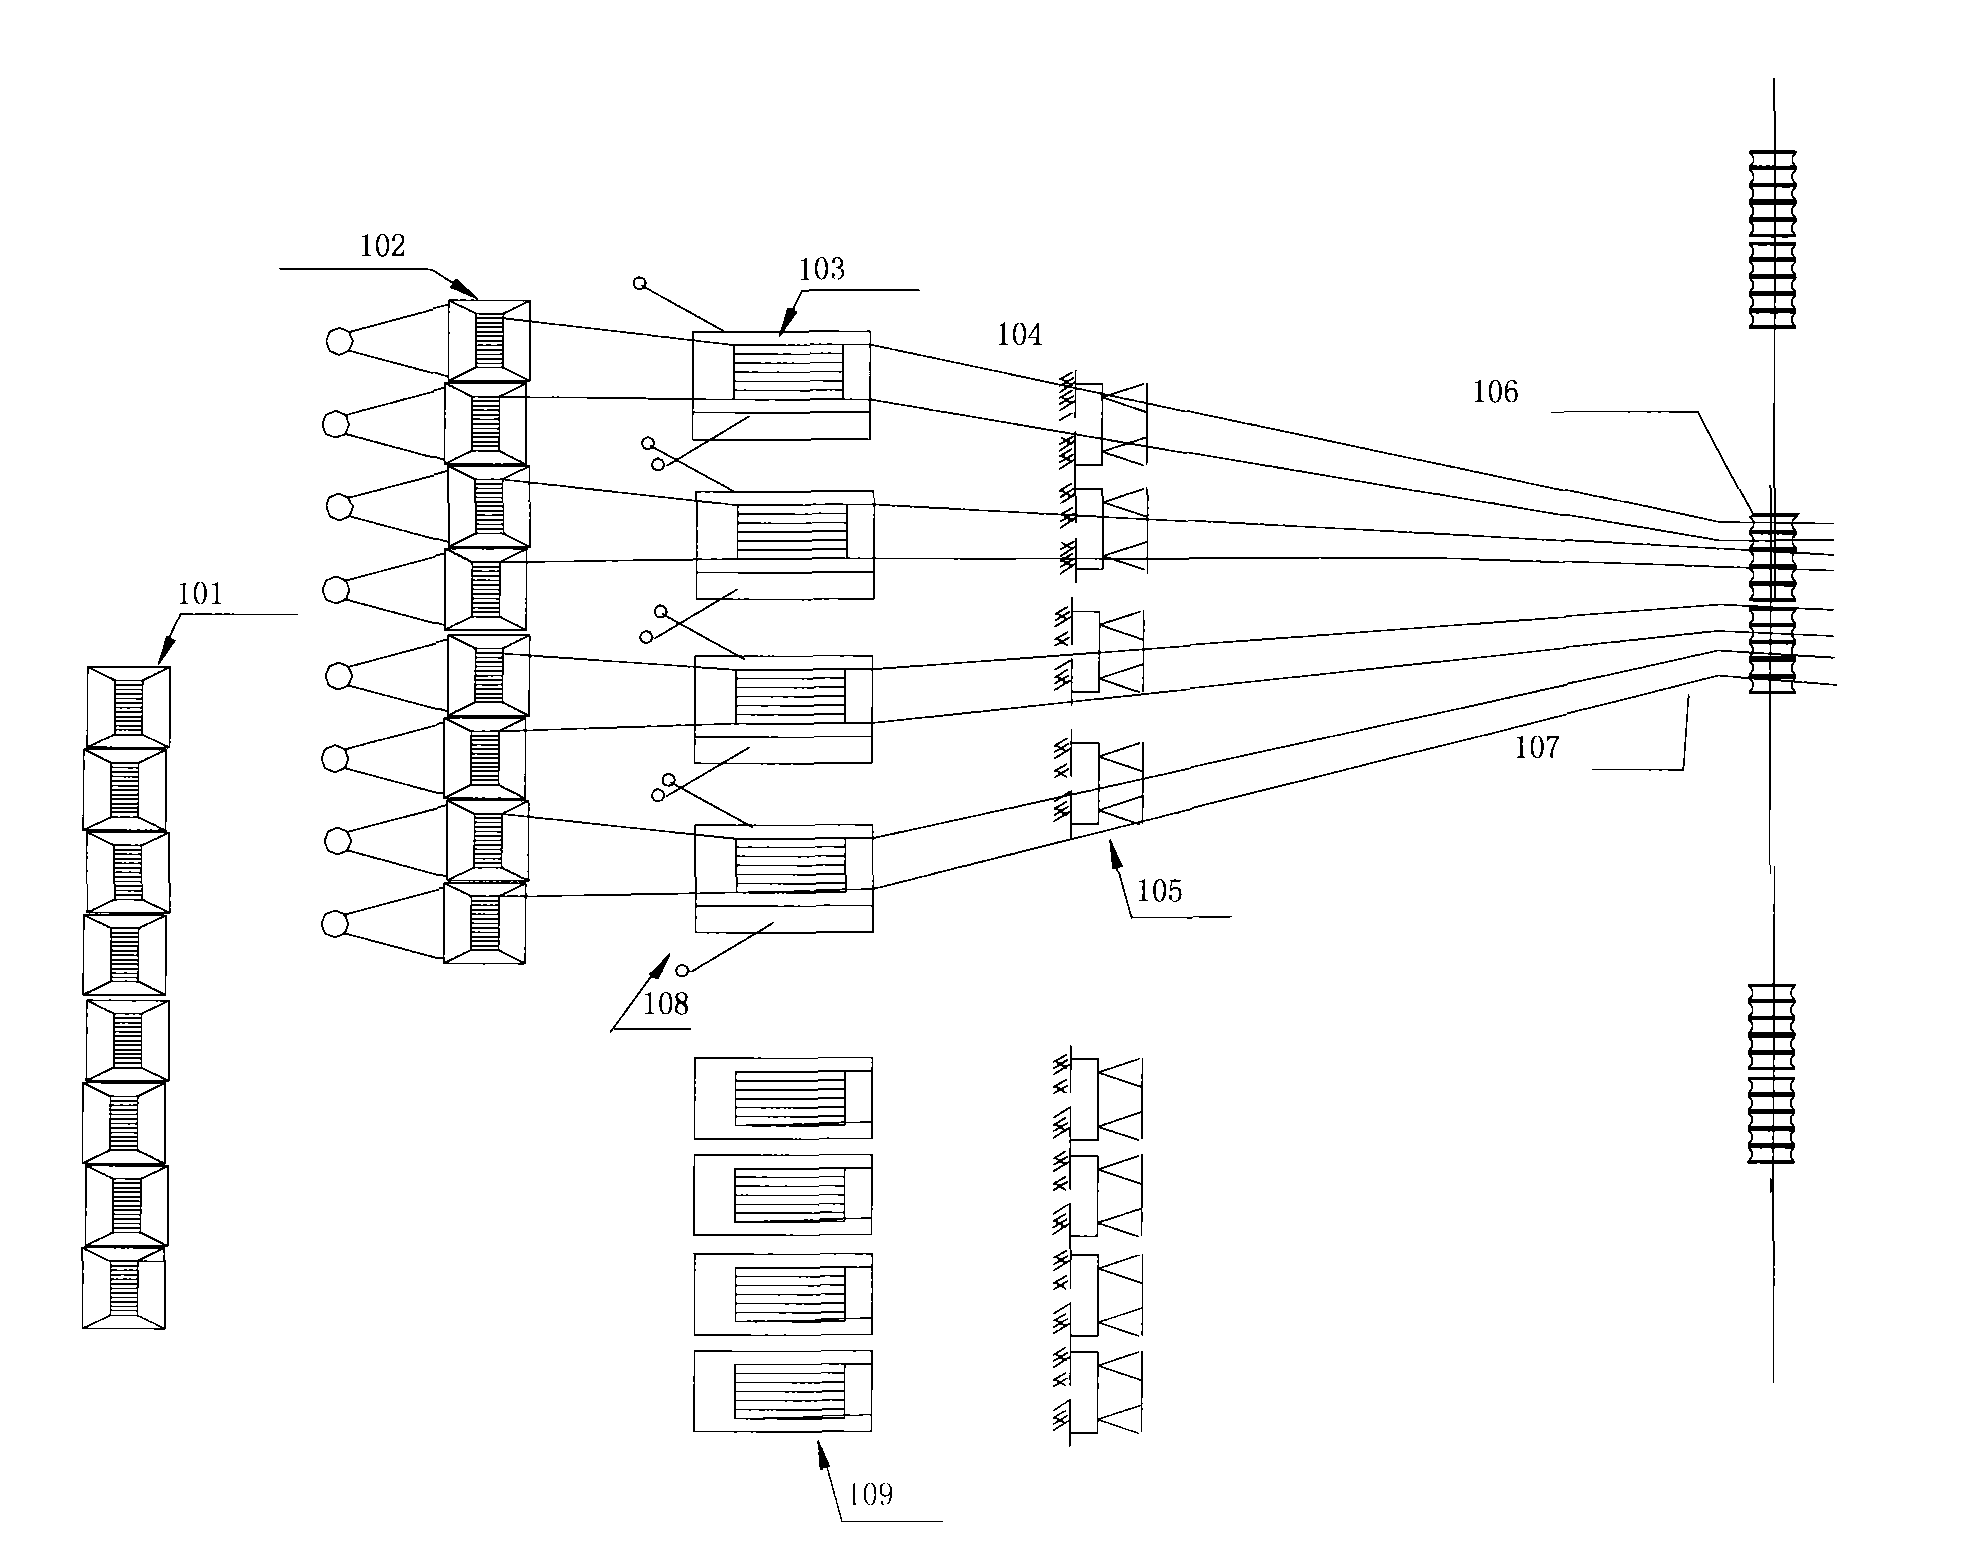 Method of extra-high voltage tension stringing